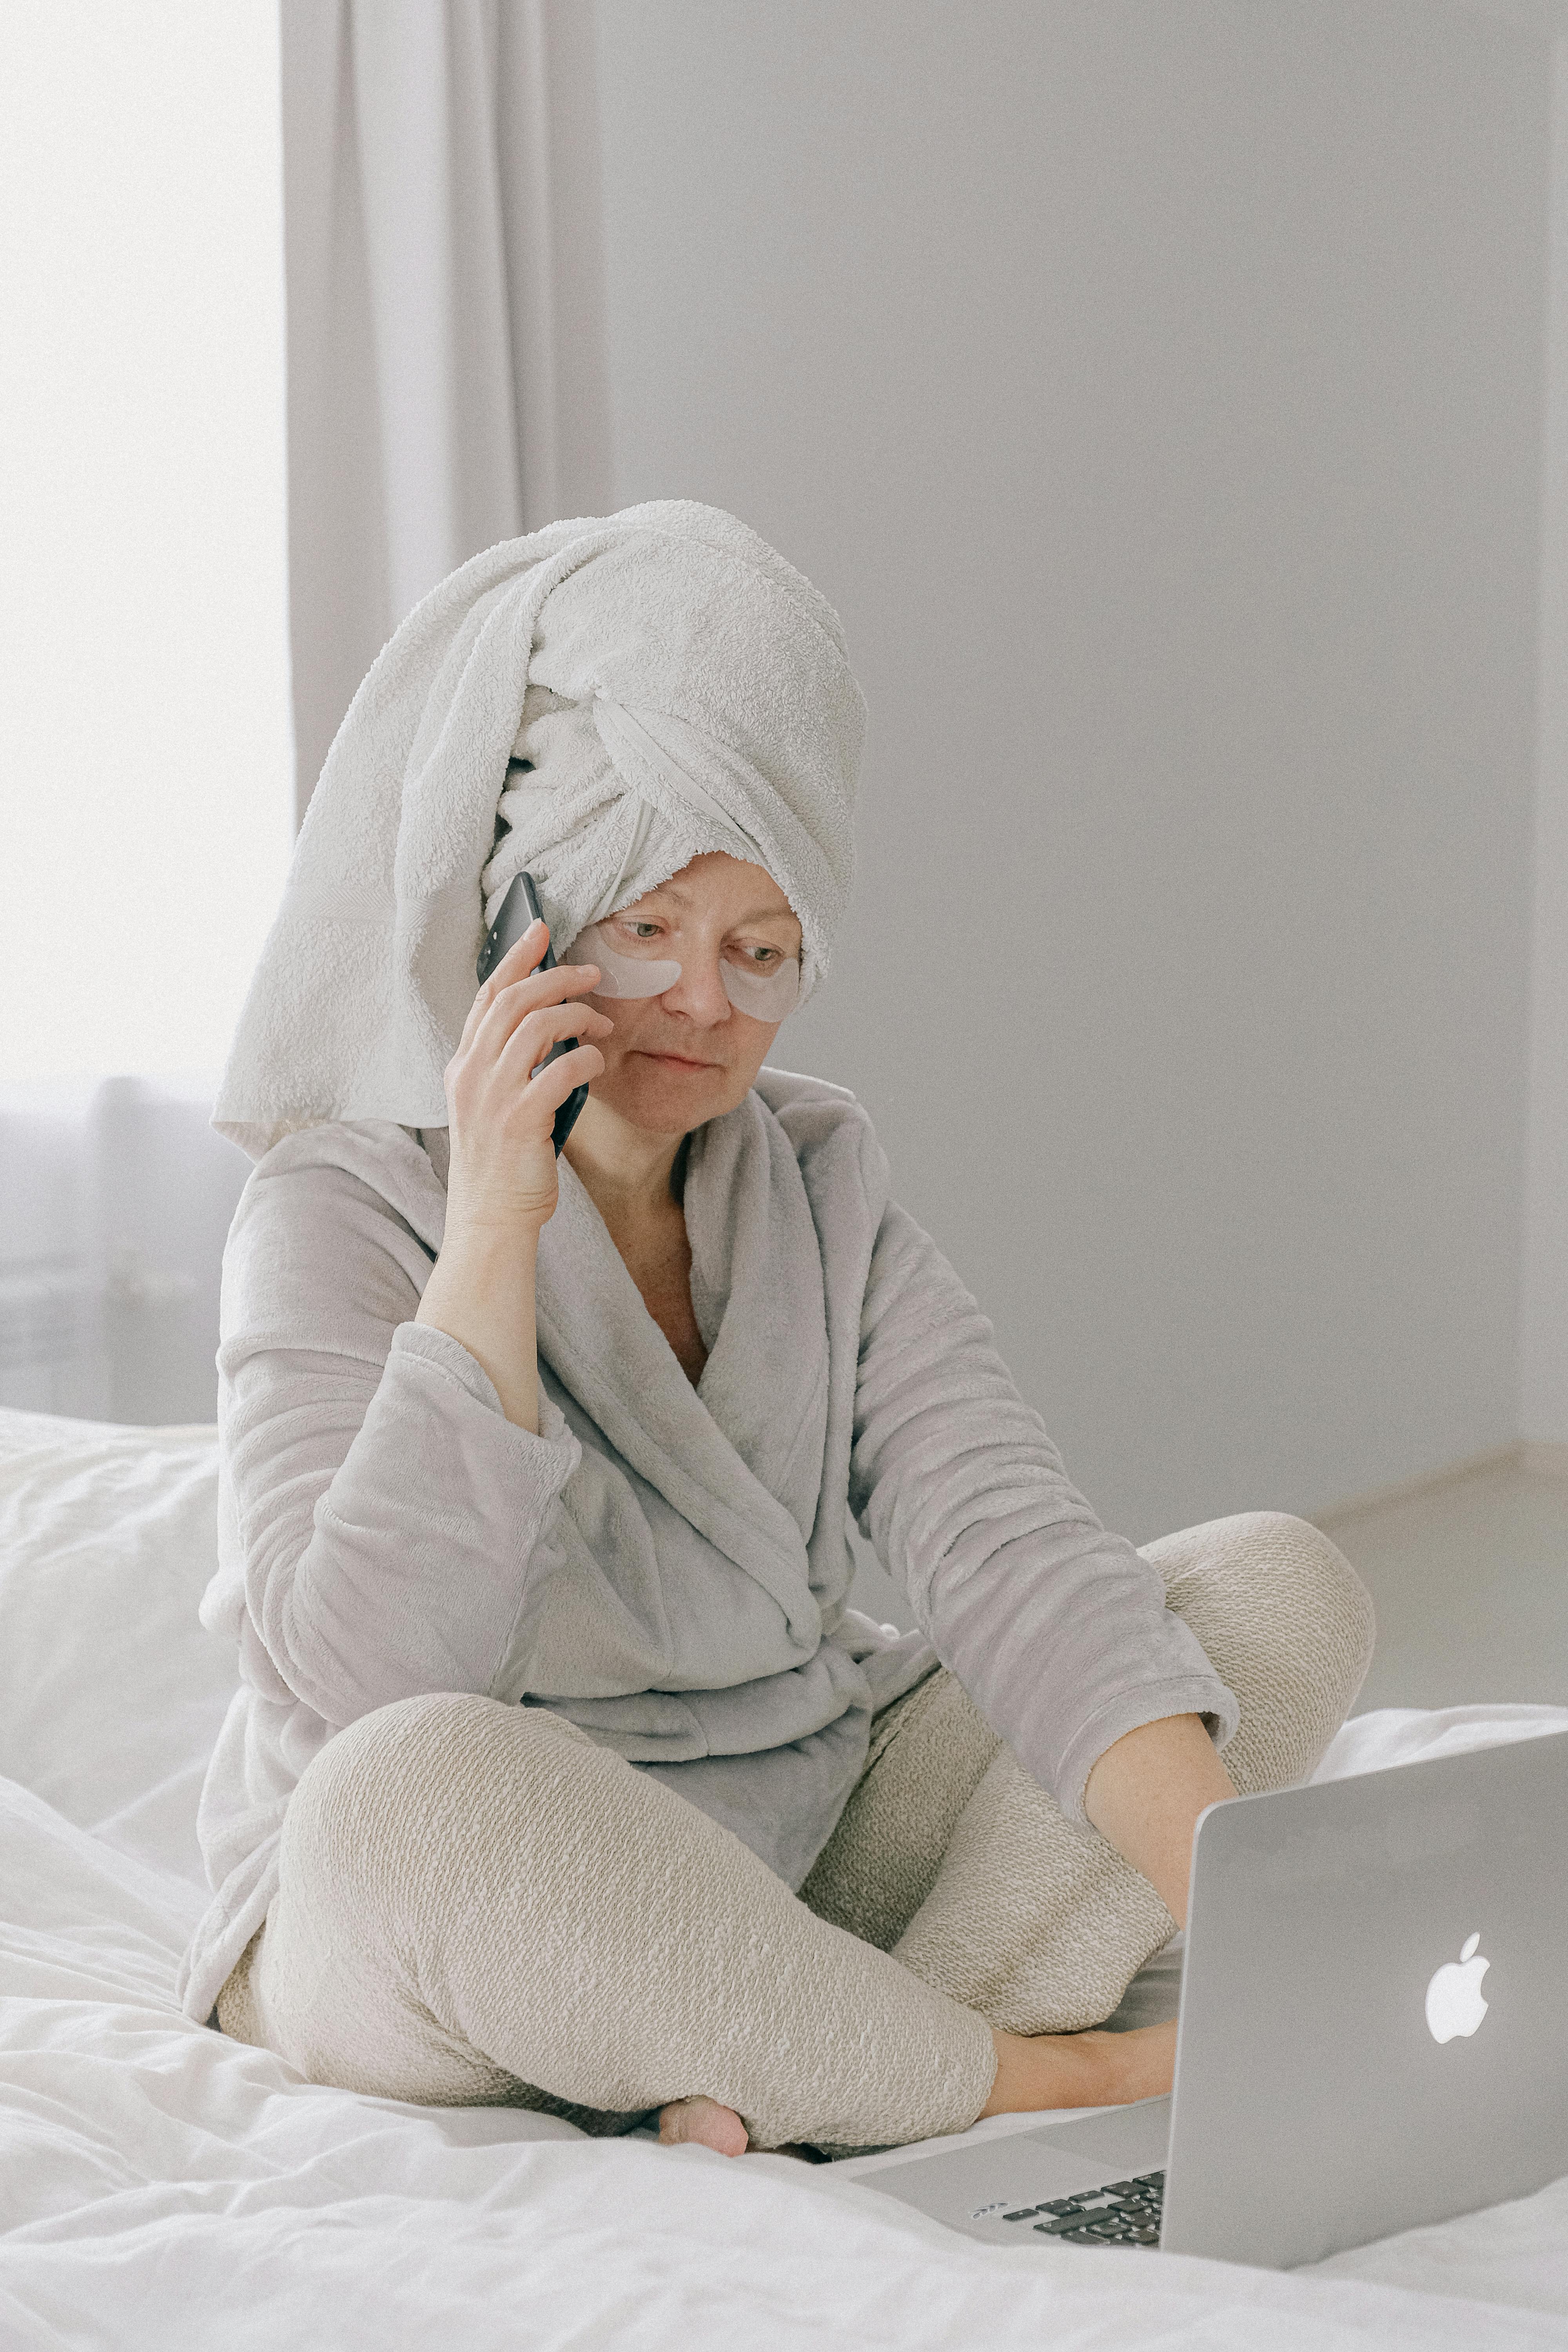 A stern-looking woman wearing a head towel while on the phone | Source: Pexels